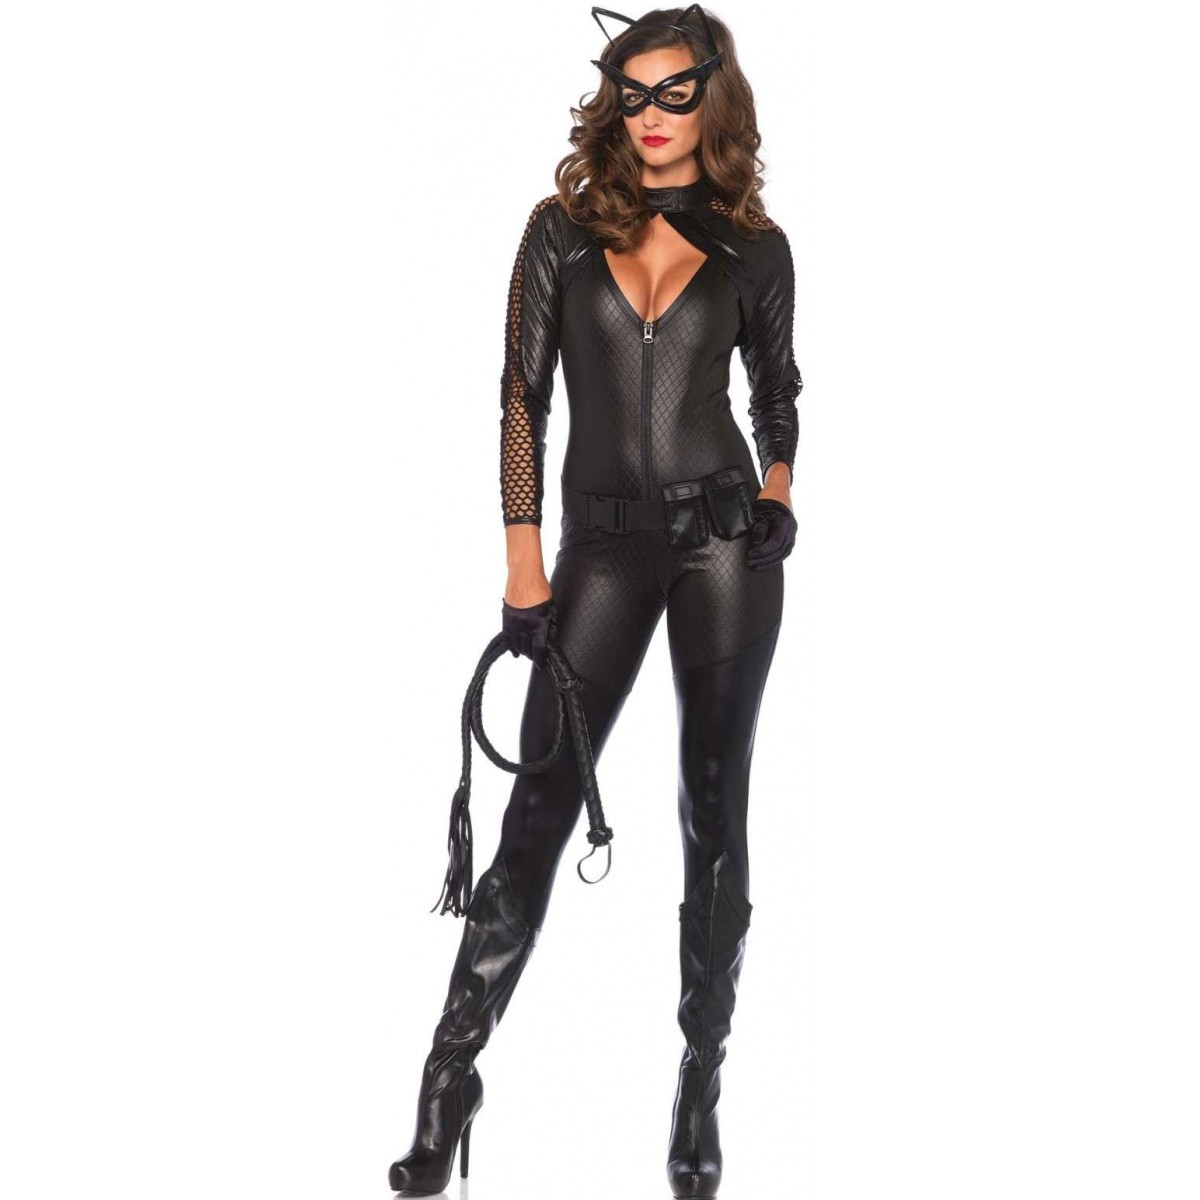 Wicked Kitty Womens Catwoman Costume| Halloween Costumes